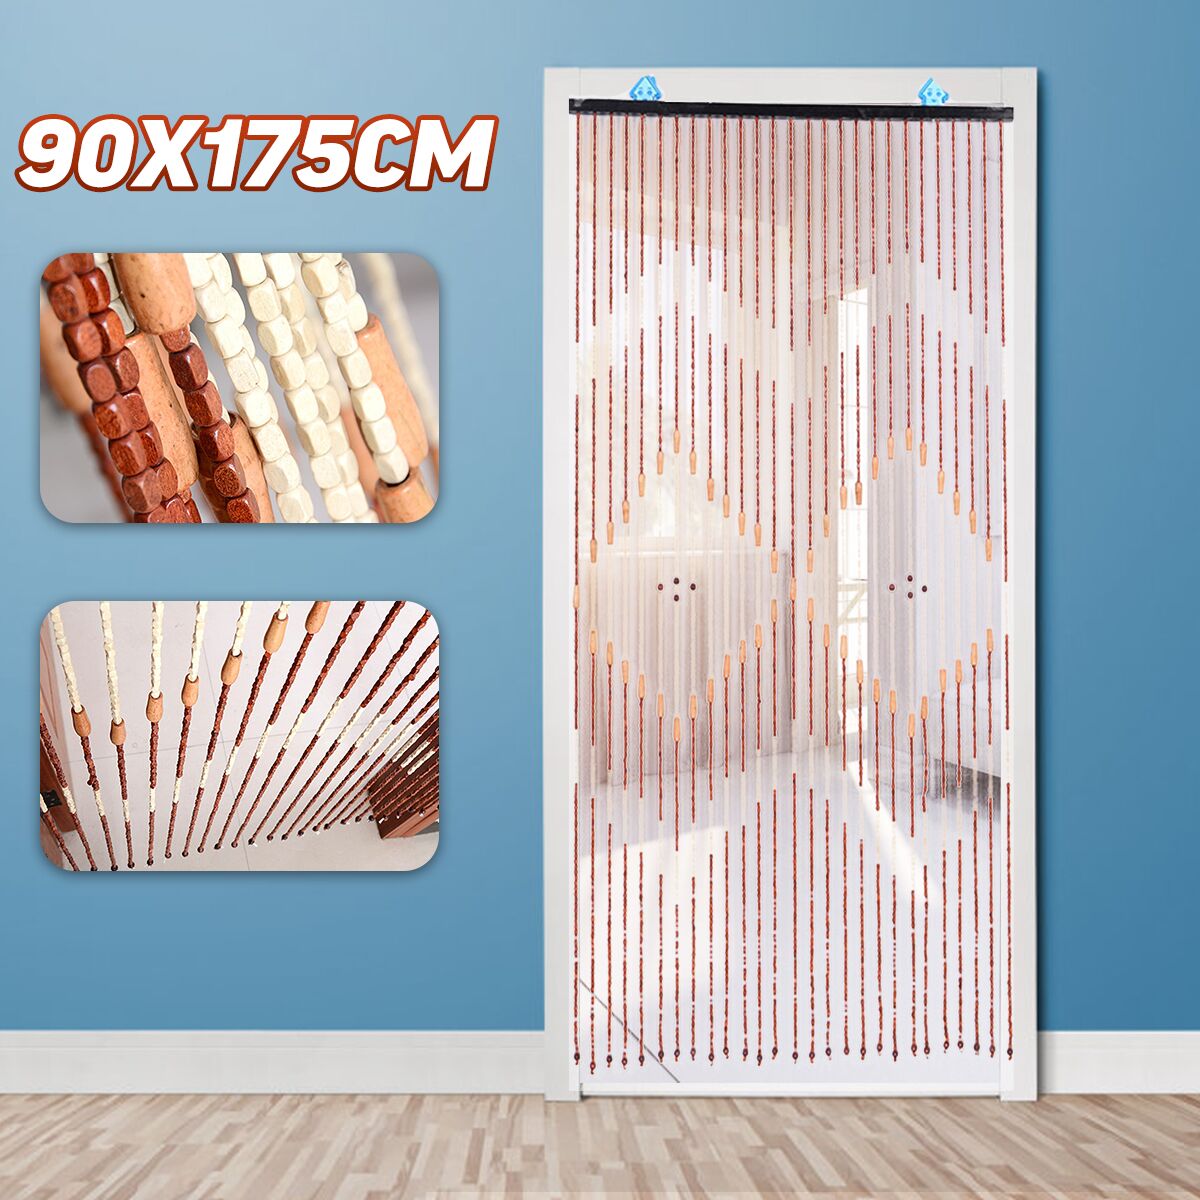 90x175cm-27Line-Wooden-Bead-Curtains-Fly-Screen-Porch-Bedroom-Living-Room-Divider-1599032-1